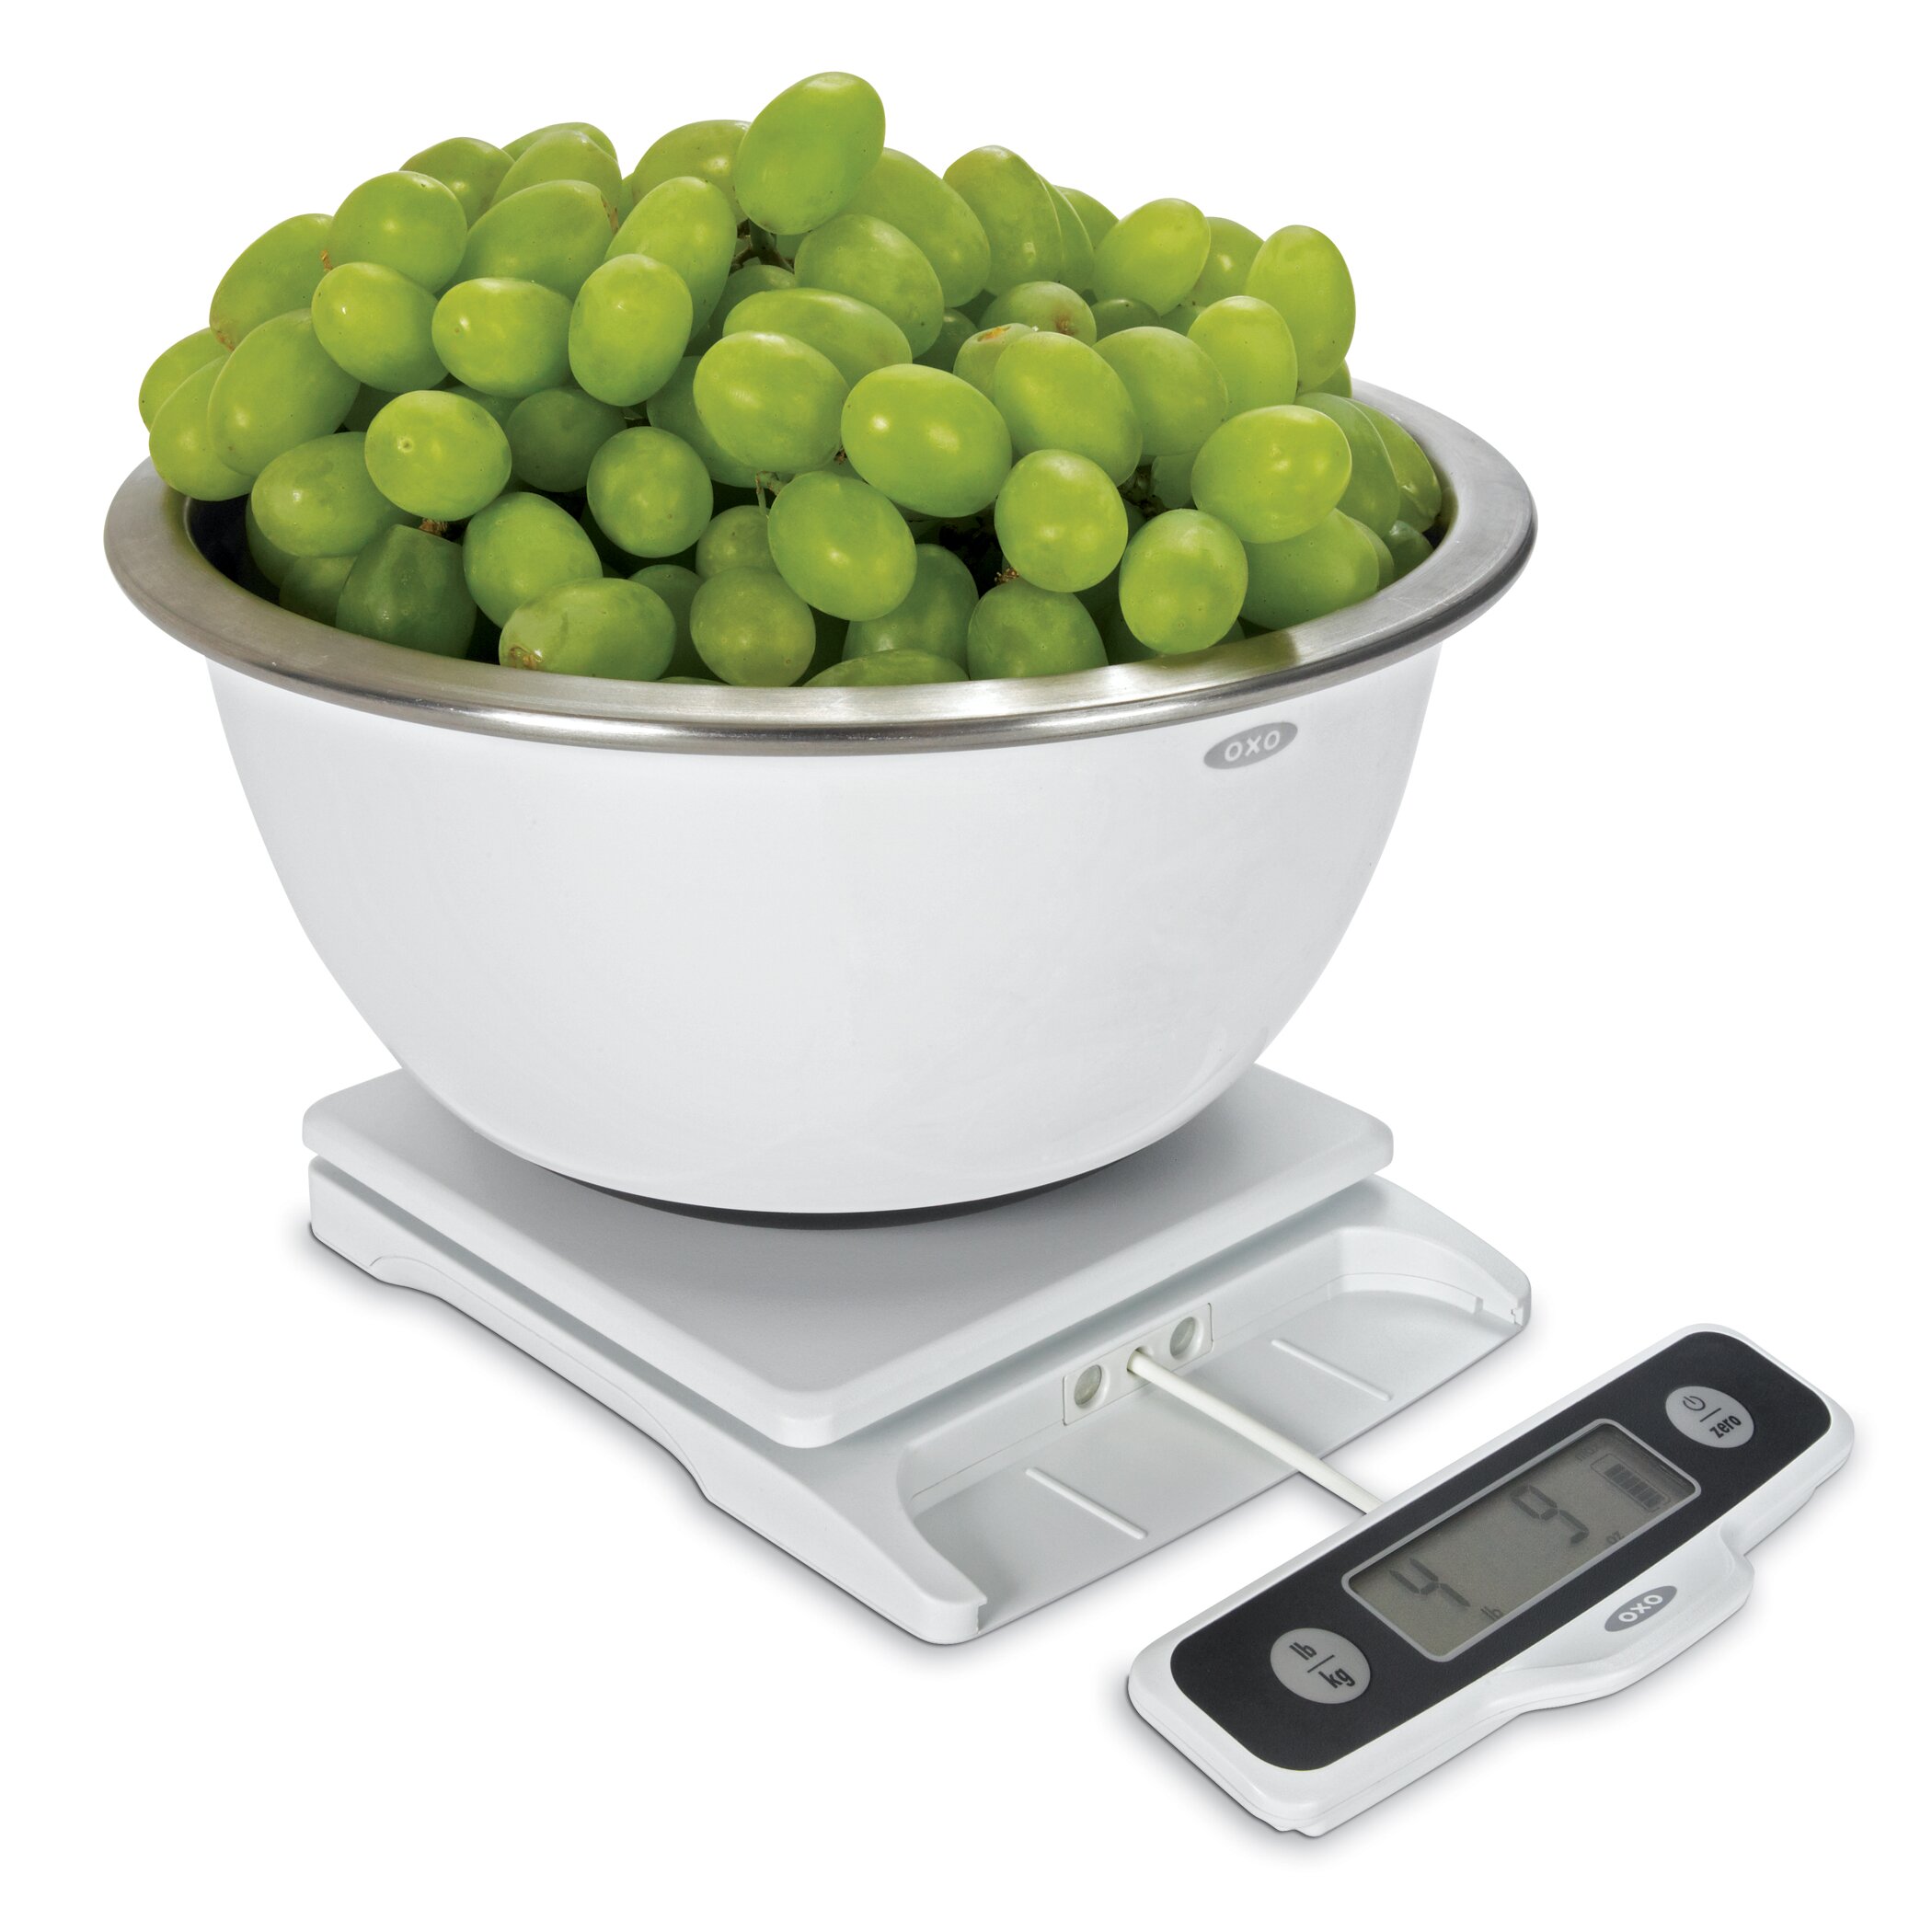 Where can you purchase an Oxo food scale?